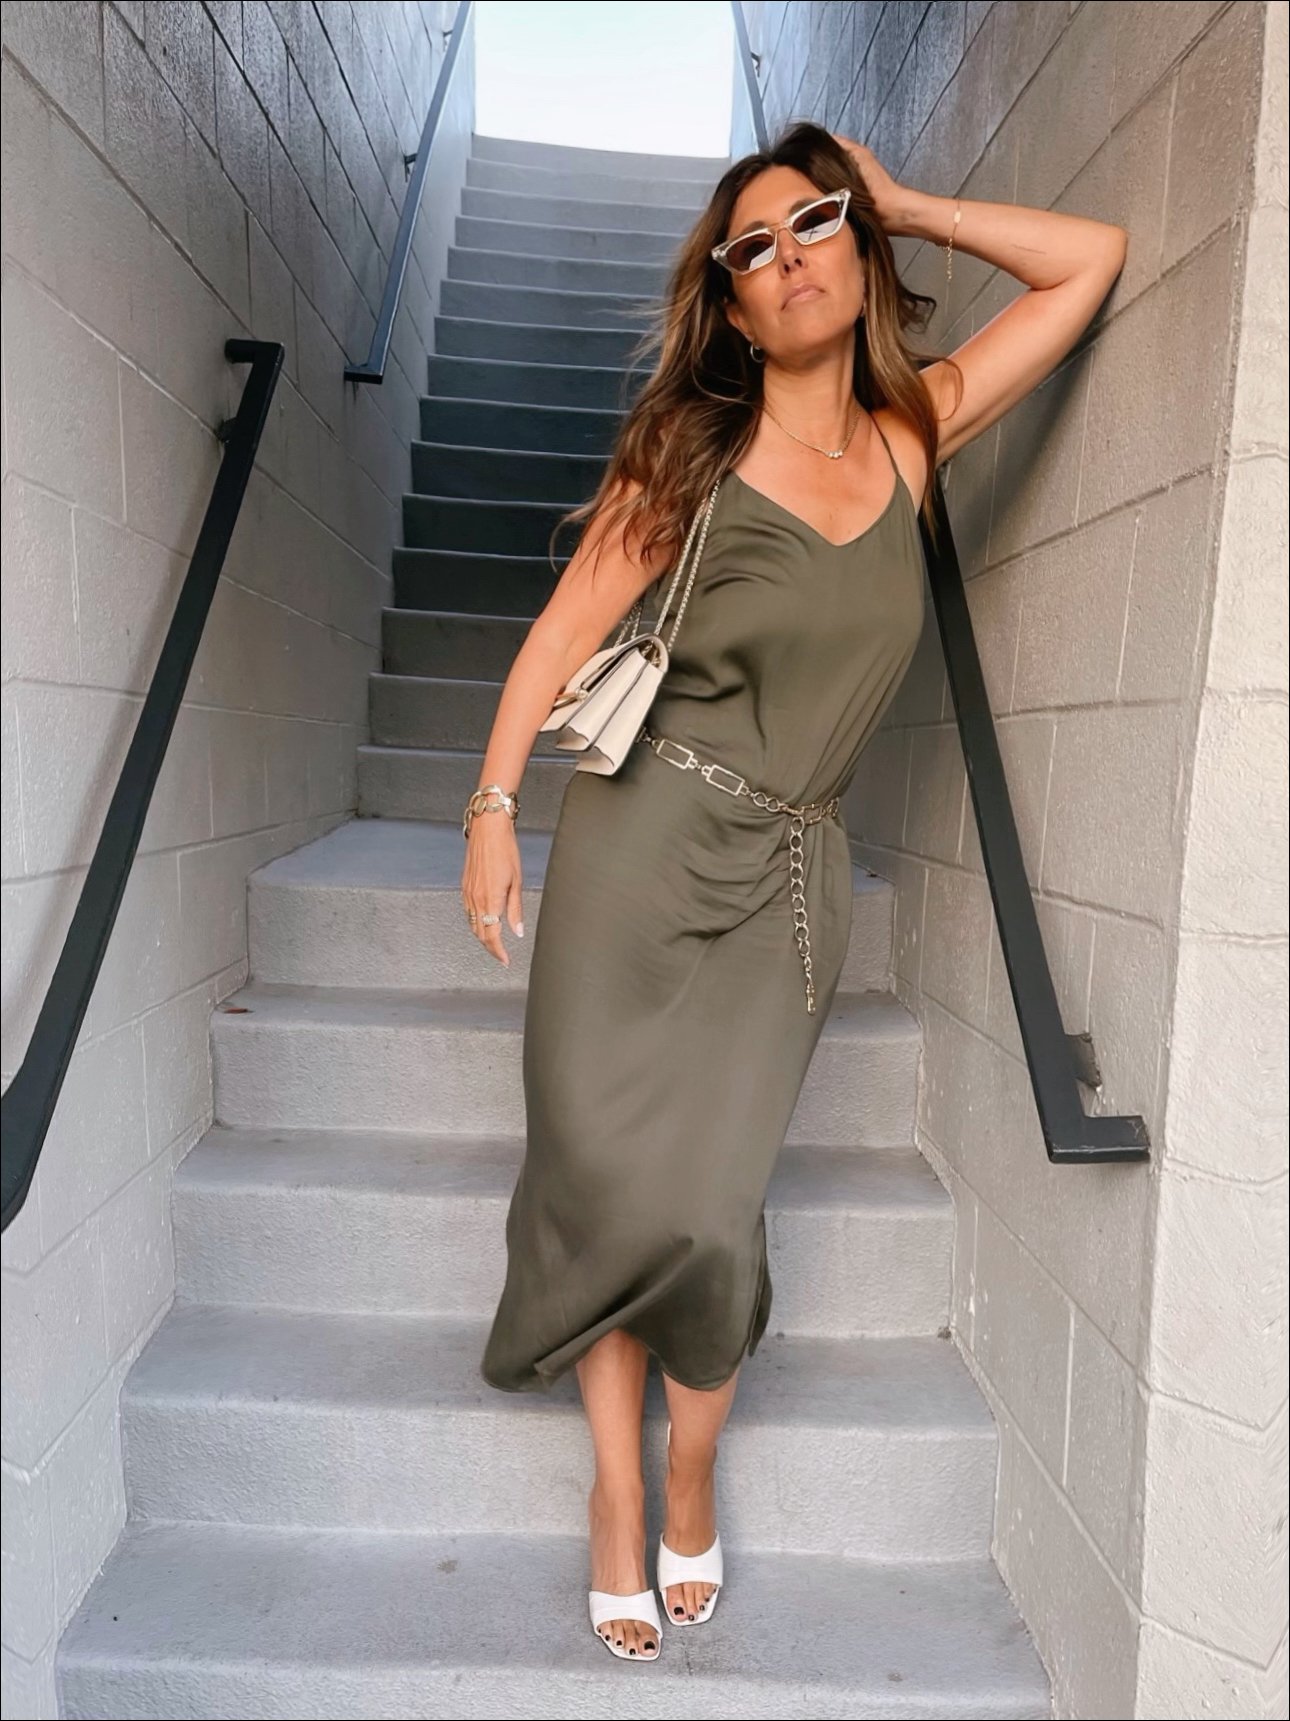 I Have This Sustainable Slip Dress in 2 Styles — The Glow Girl by